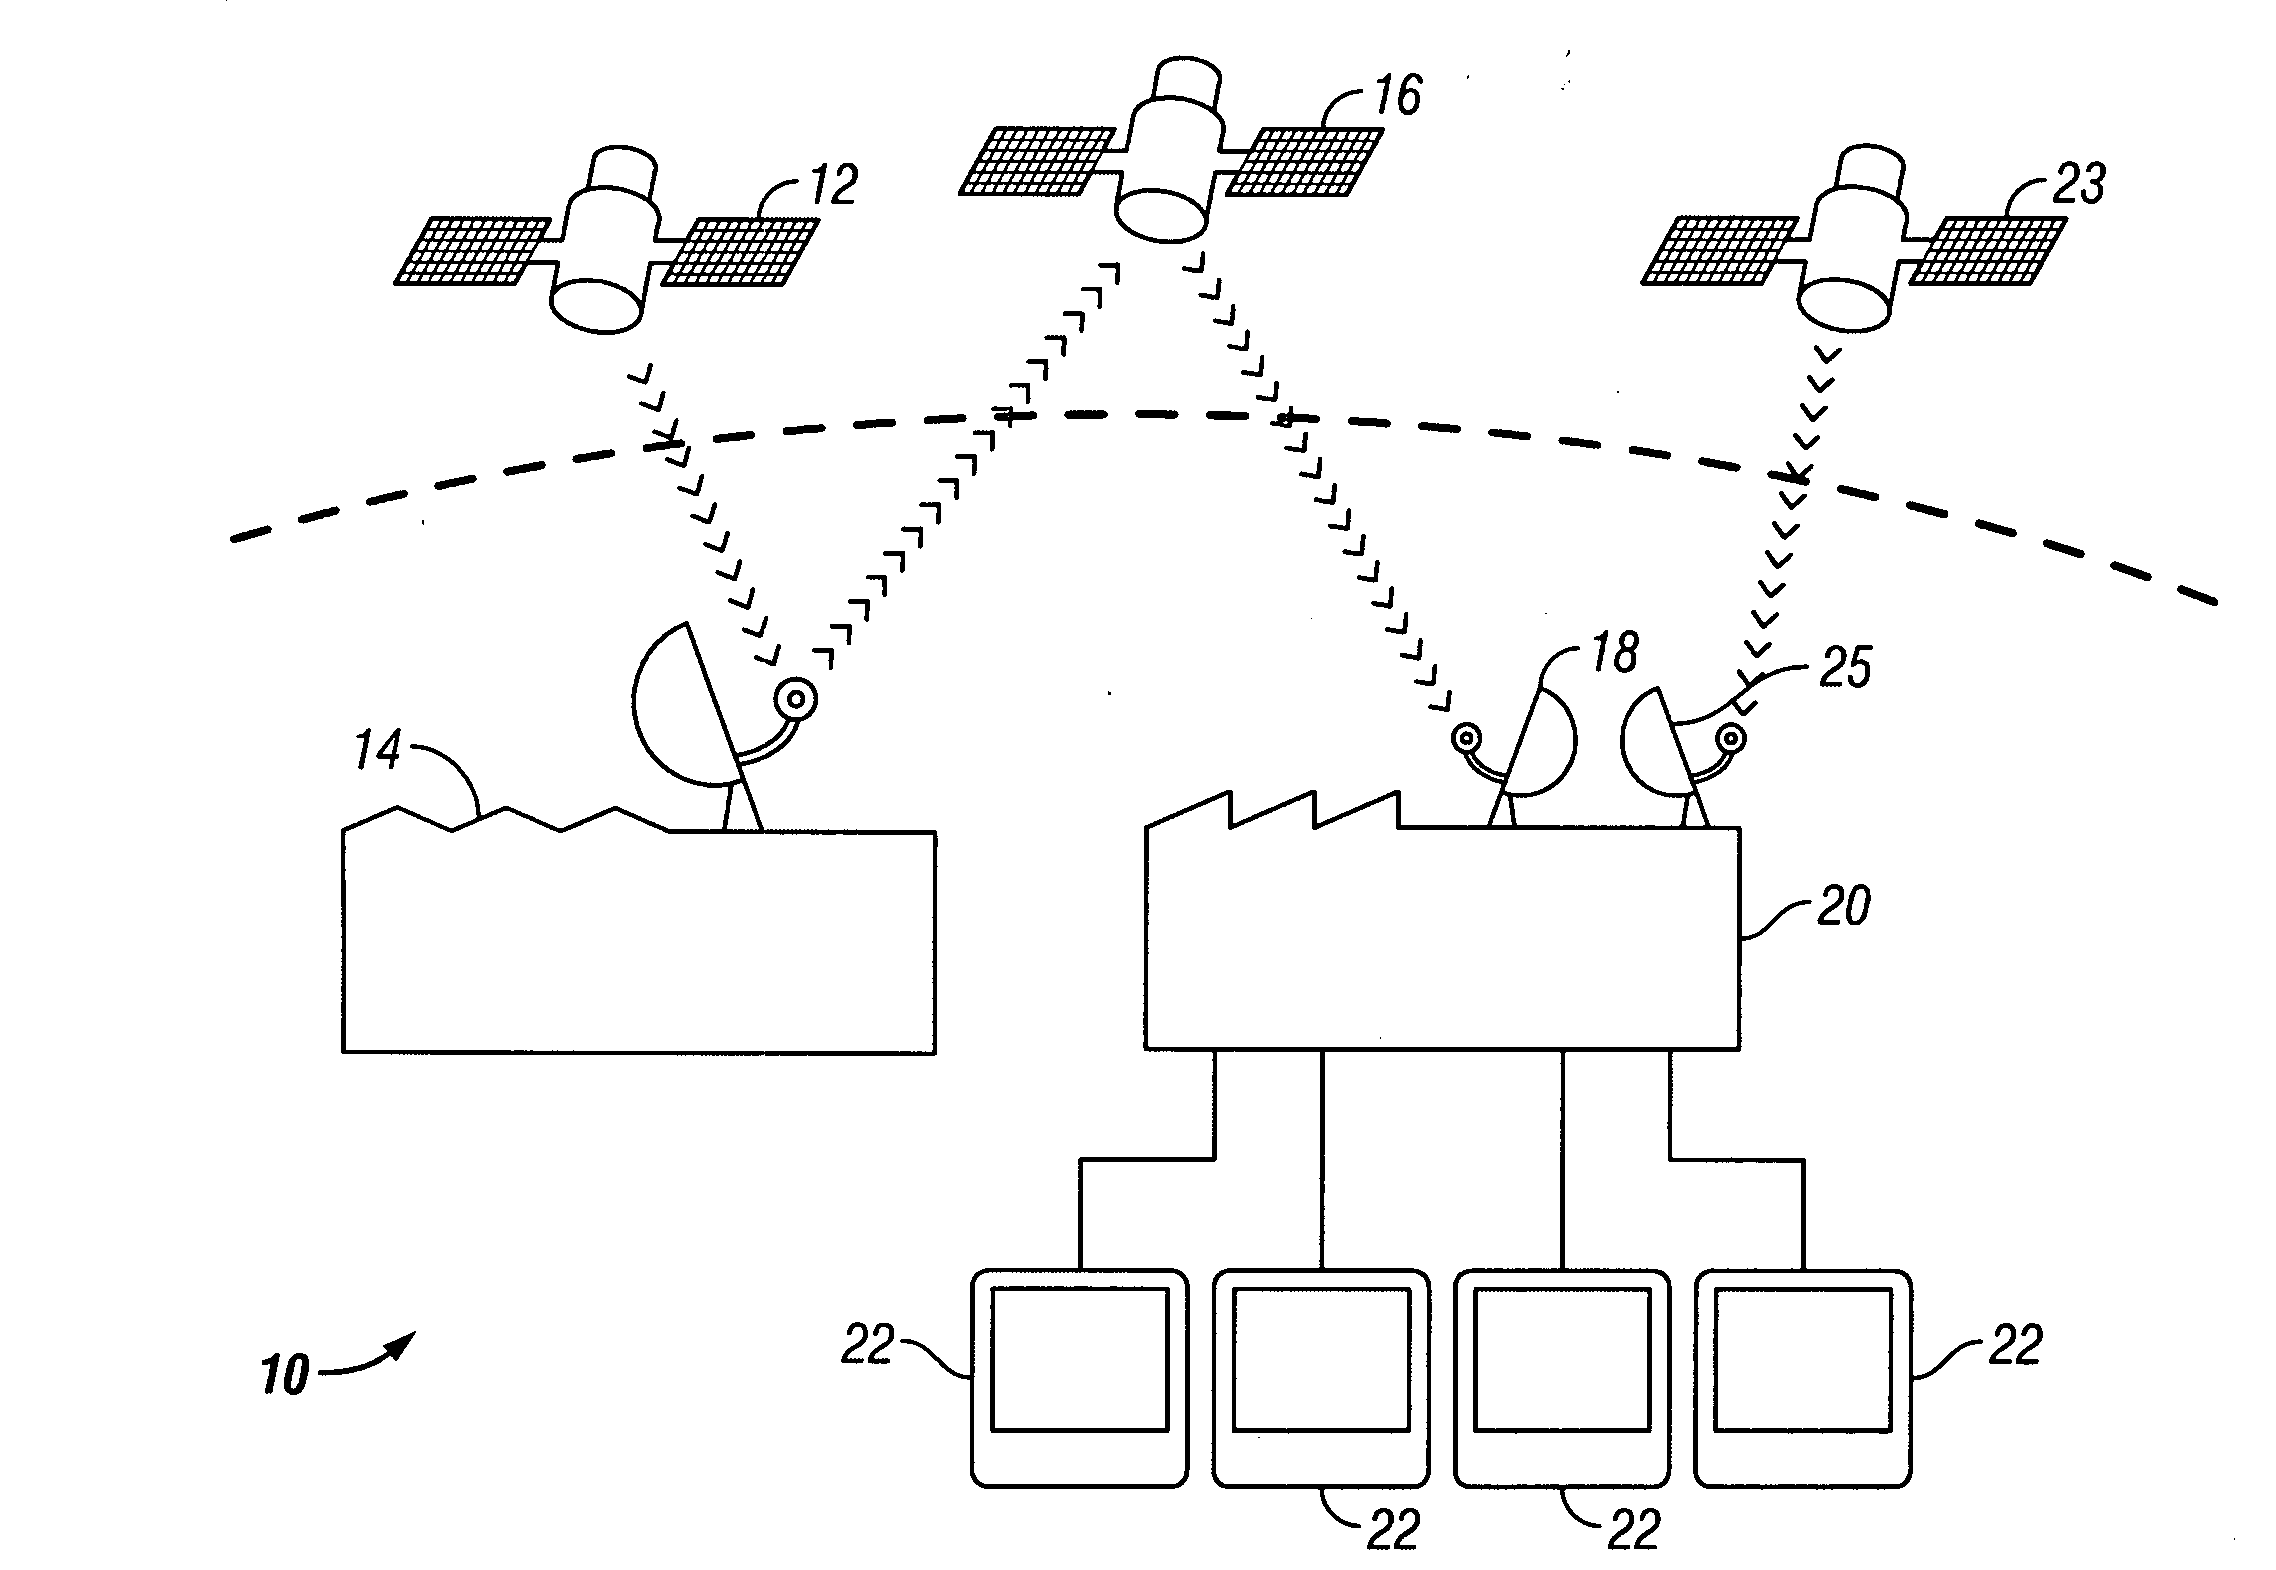 System and methods for network TV broadcasts for out-of-home viewing with targeted advertising